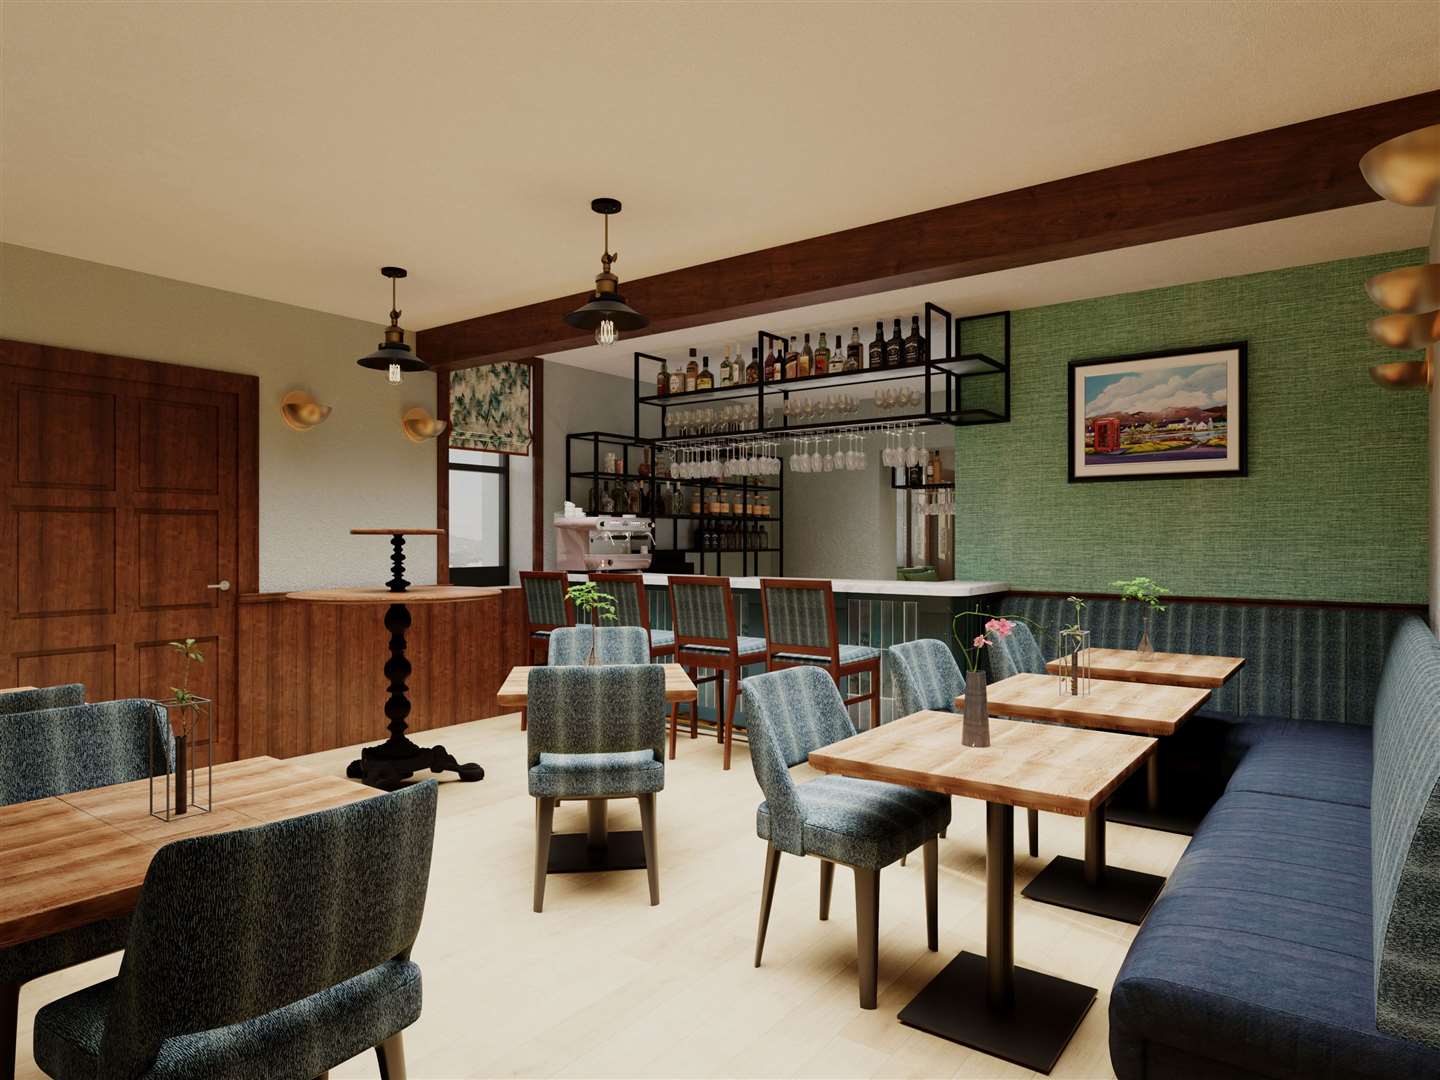 An artist's impression of how the bar will look.